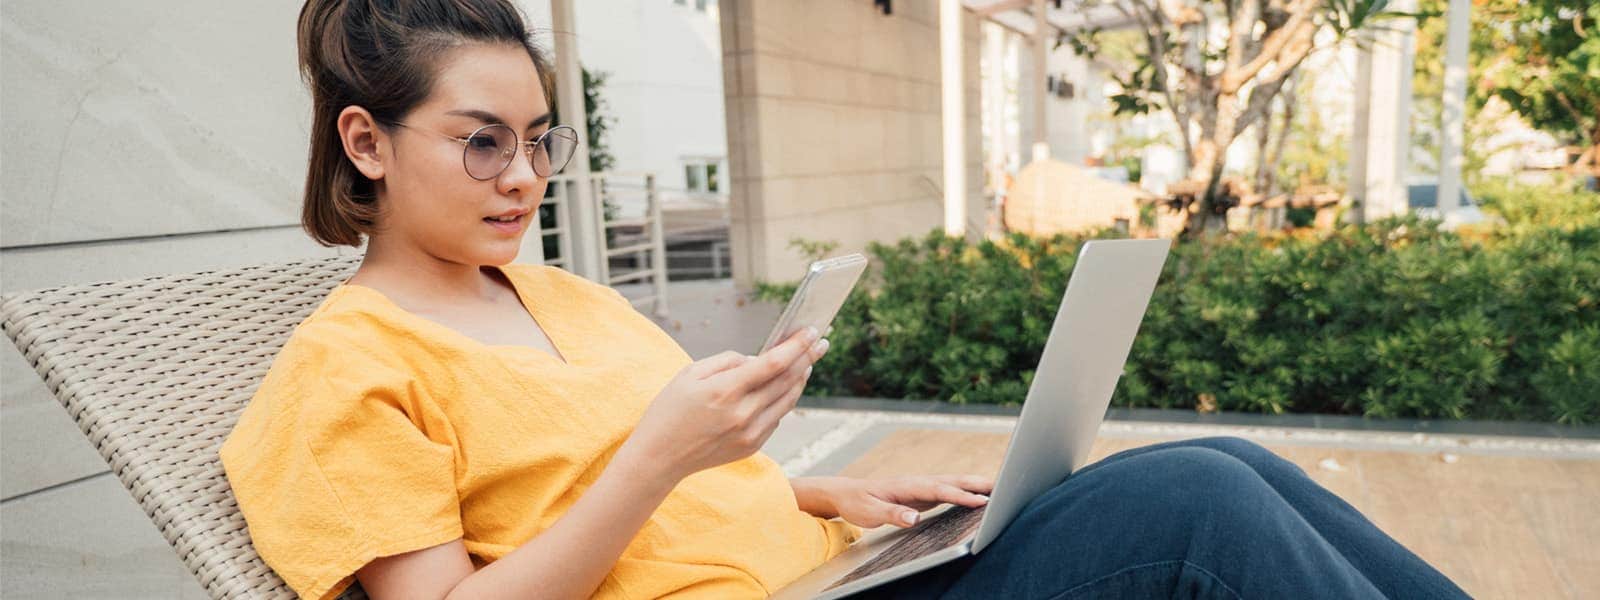 an Asian woman in an orange blouse lounges outside with a laptop in her lap and a cellphone in her hand, indicating she might be investing in cryptocurrency and also experienced a cryptocurrency scam